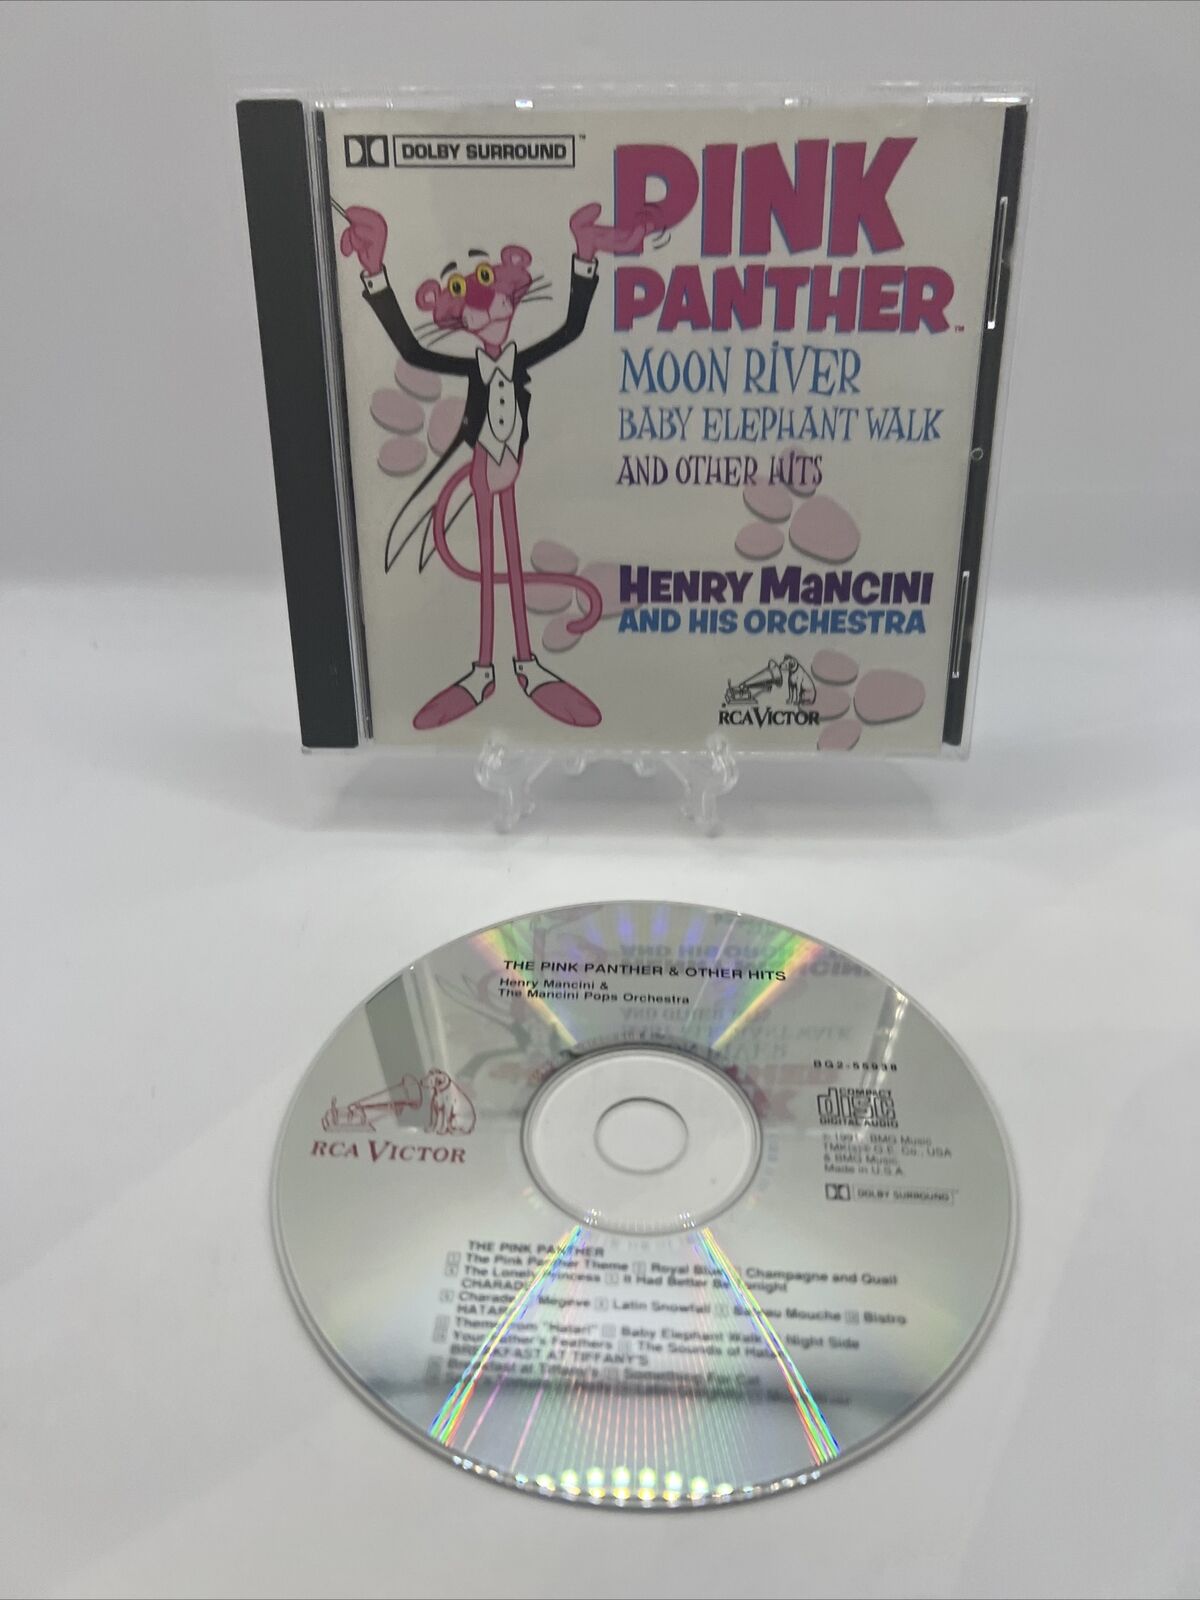 The Pink Panther And Other Hits - Henry Mancini & His Orchestra (1992, BMG) Jazz